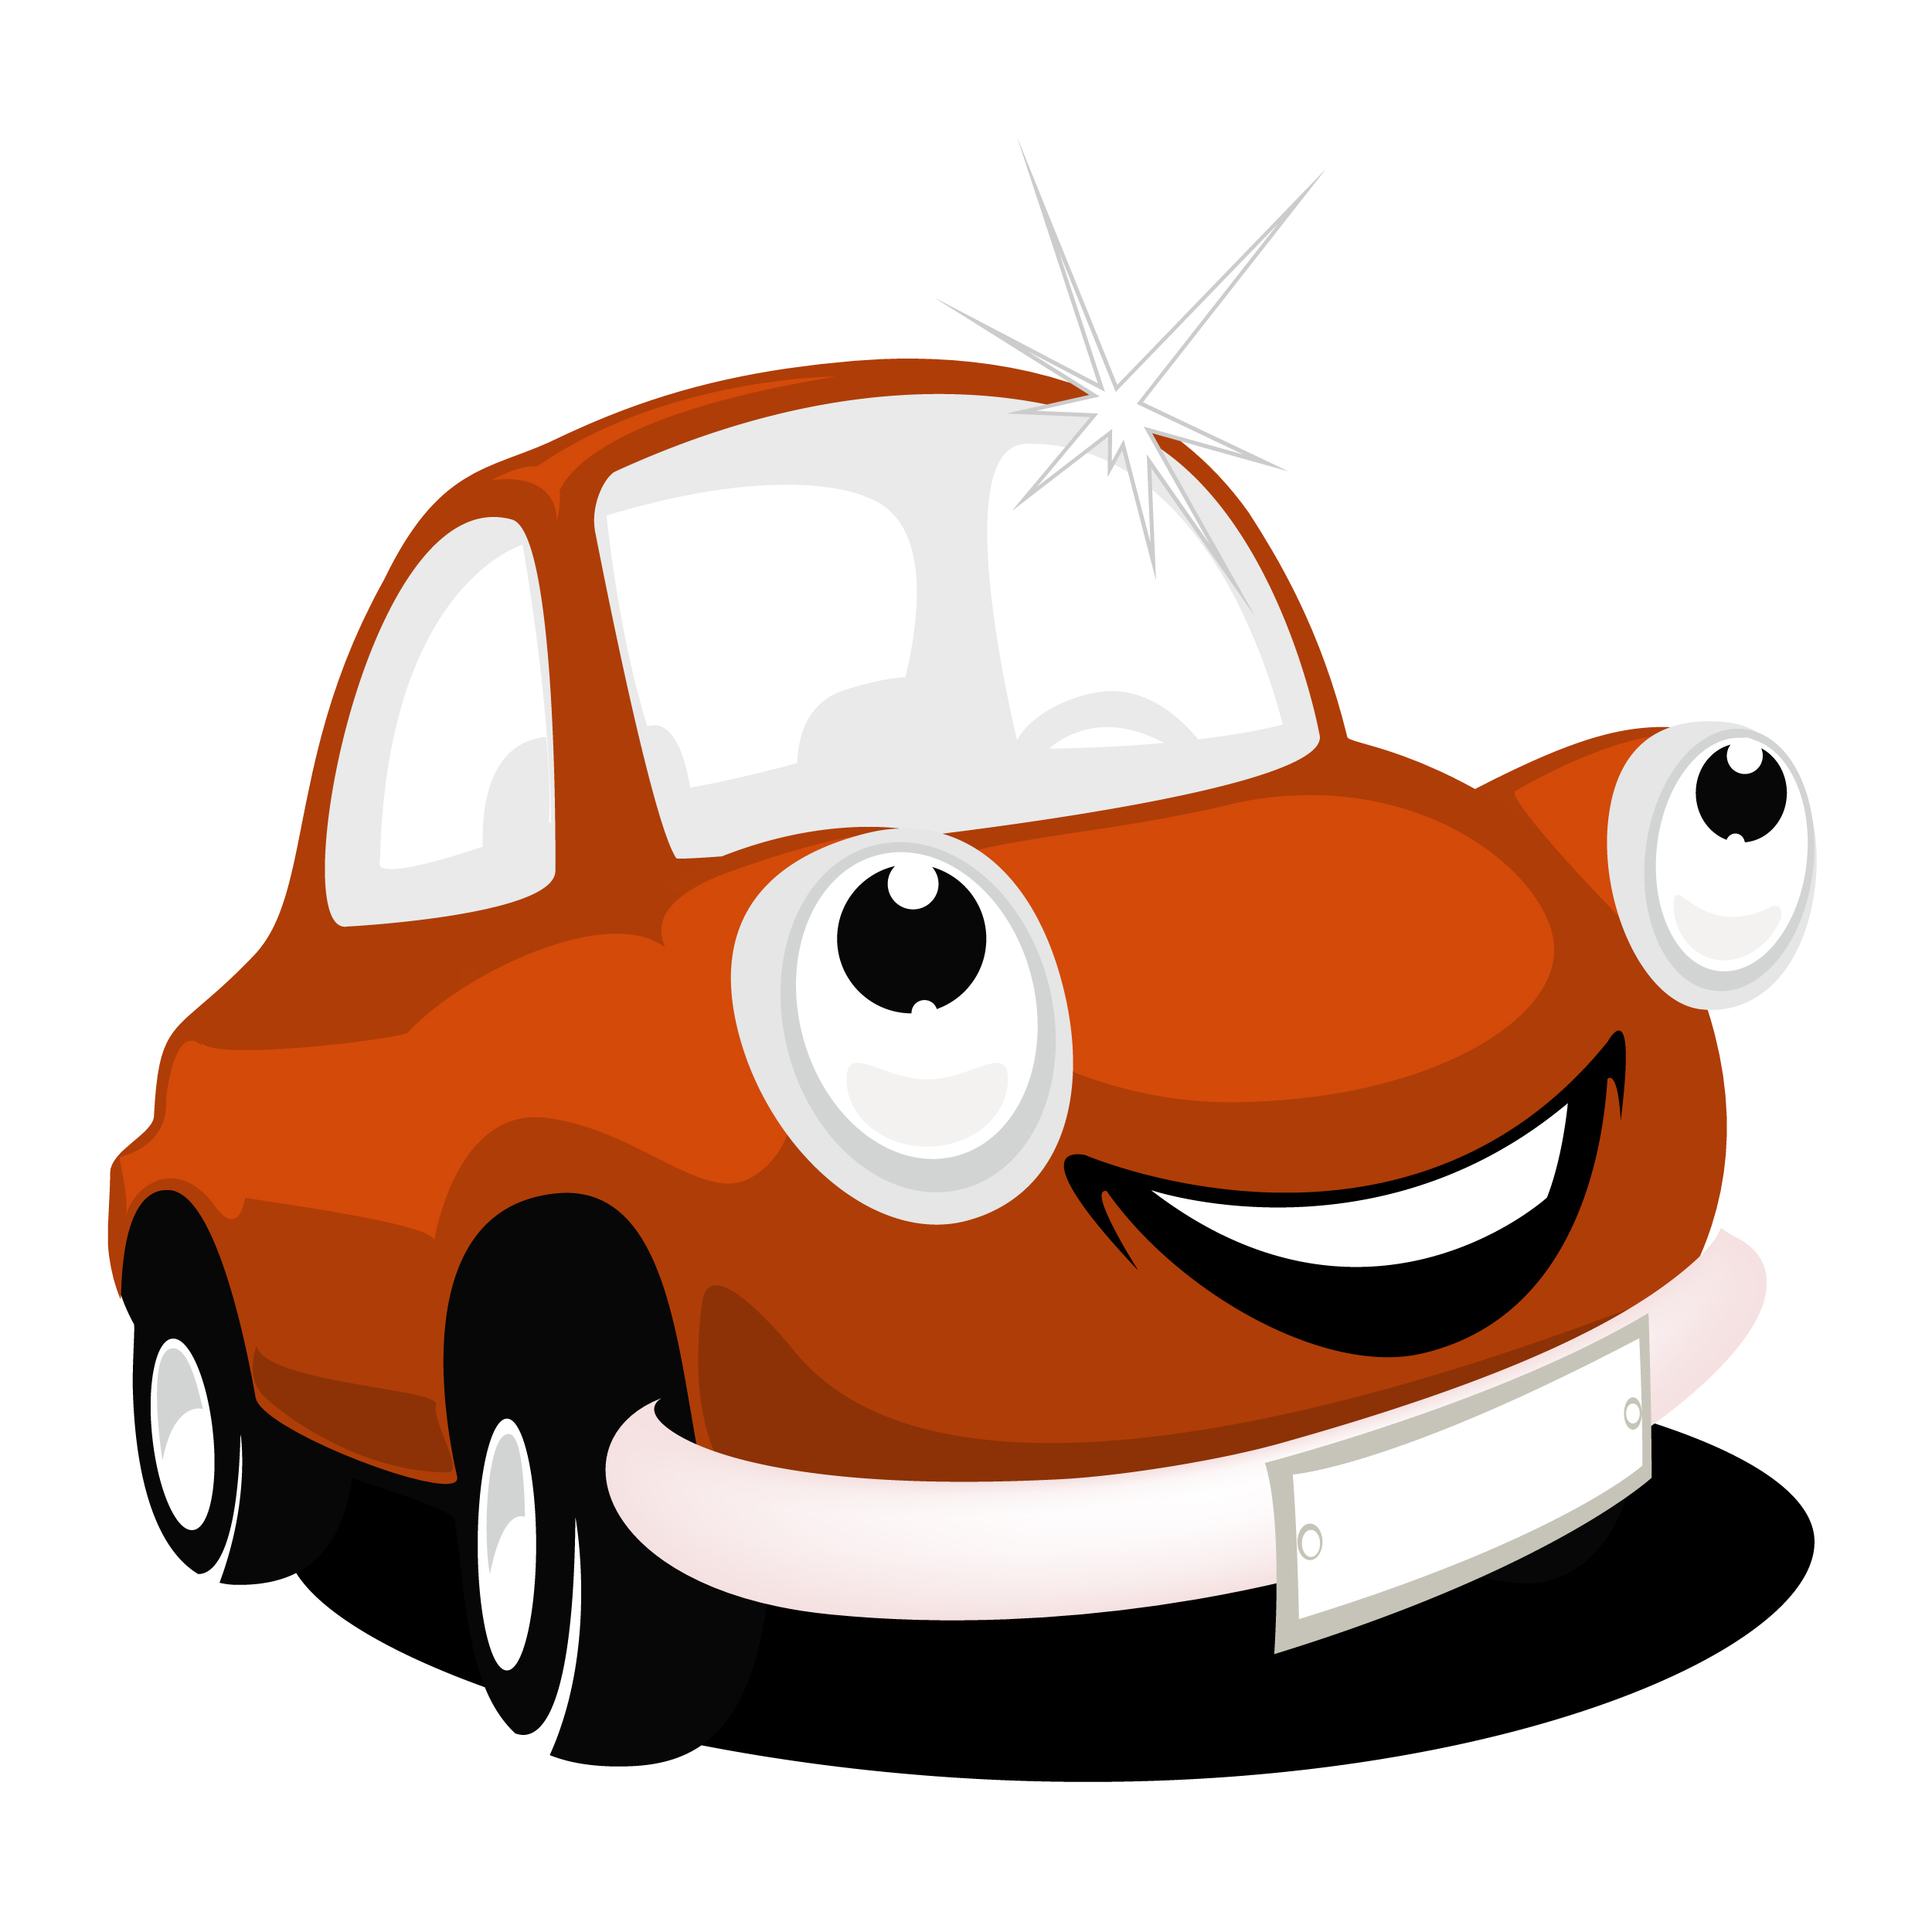 Free Cartoon Images Of Cars, Download Free Clip Art, Free